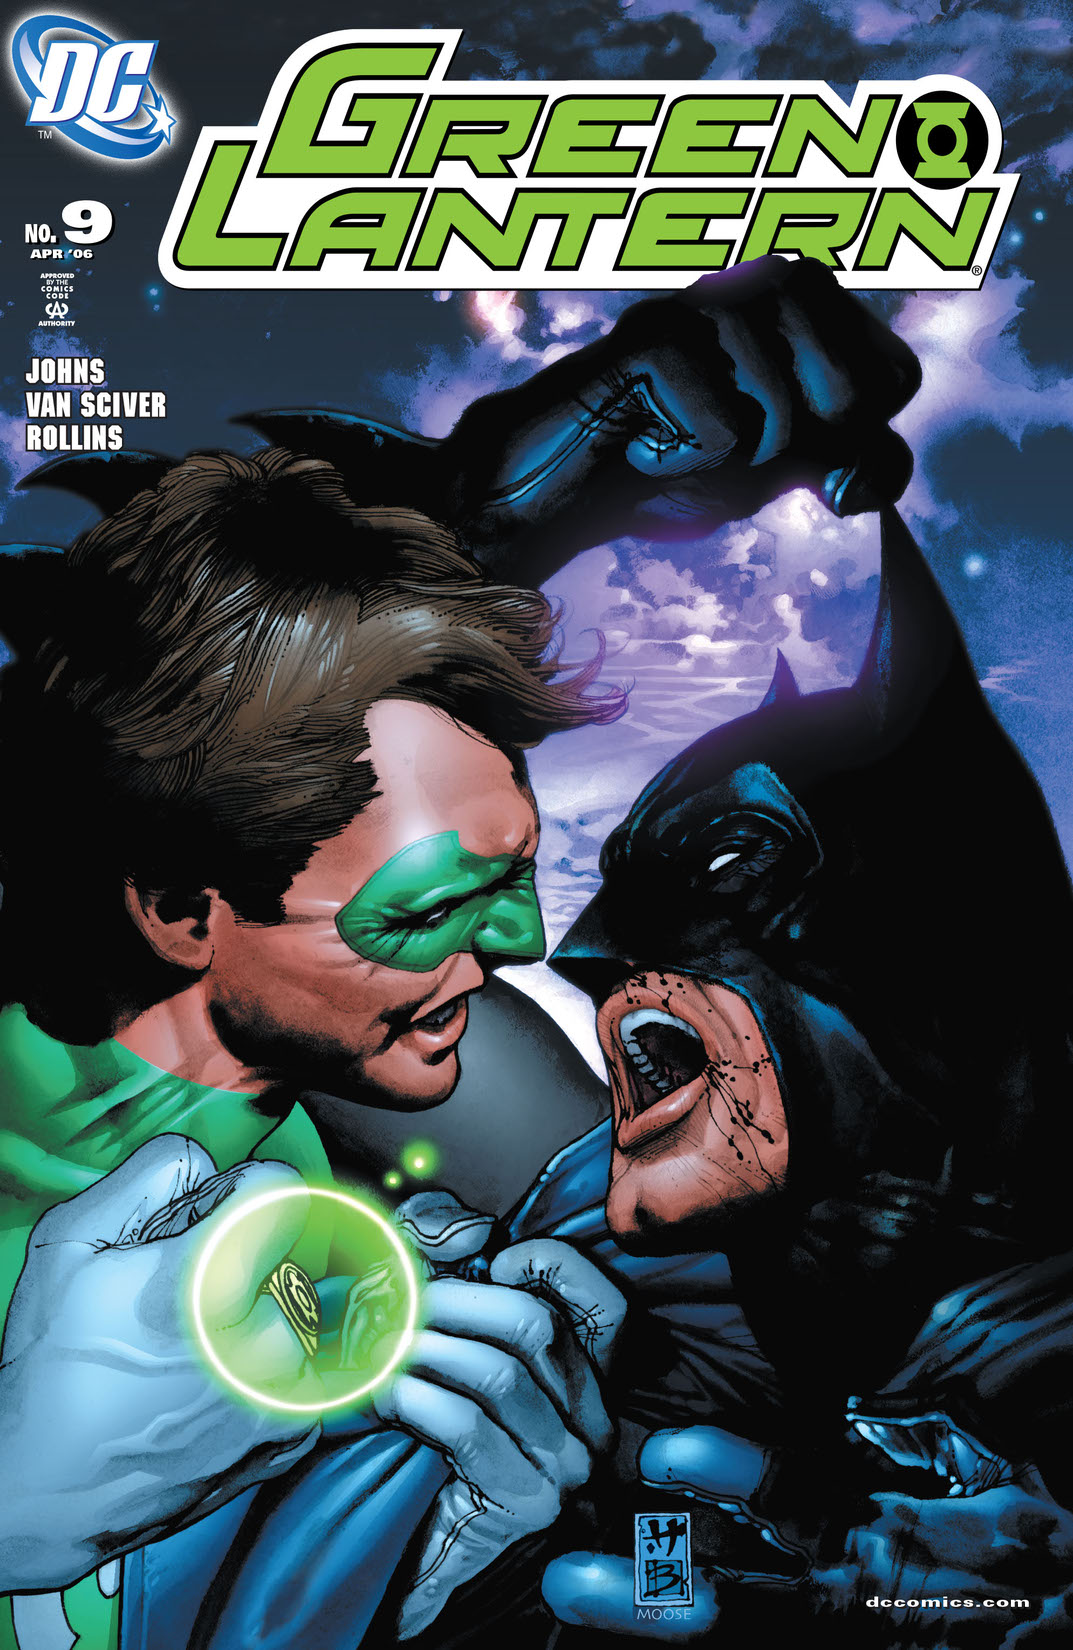 Green Lantern (2005-) #9 preview images